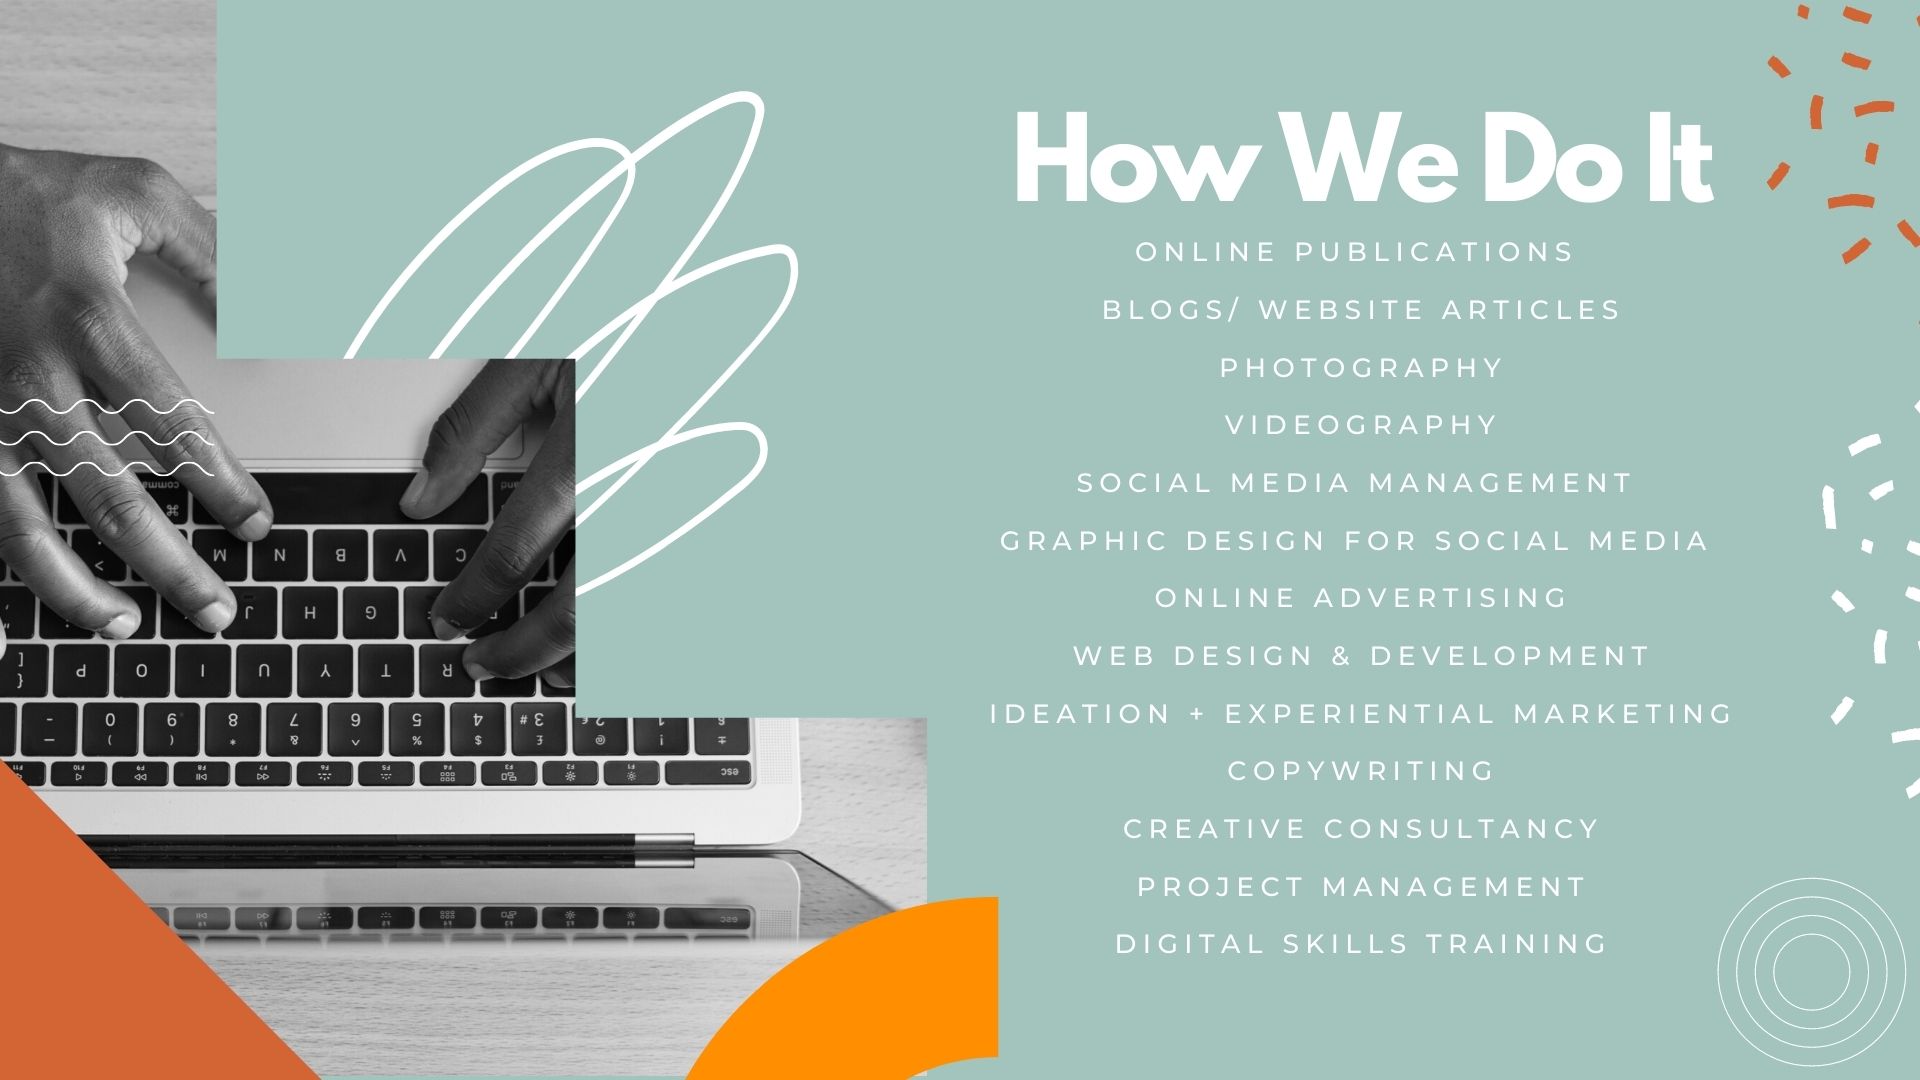 Some of Enthuse Afrika's Services include online publications BLOGS/ WEBSITE ARTICLES PHOTOGRAPHY VIDEOGRAPHY social media management graphic design for social media ONLINE ADVERTISING WEB DESIGN & DEVELOPMENT IDEATION + EXPERIENTIAL MARKETING COPYWRITING CREATIVE CONSULTANCY PROJECT MANAGEMENT DIGITAL SKILLS TRAINING